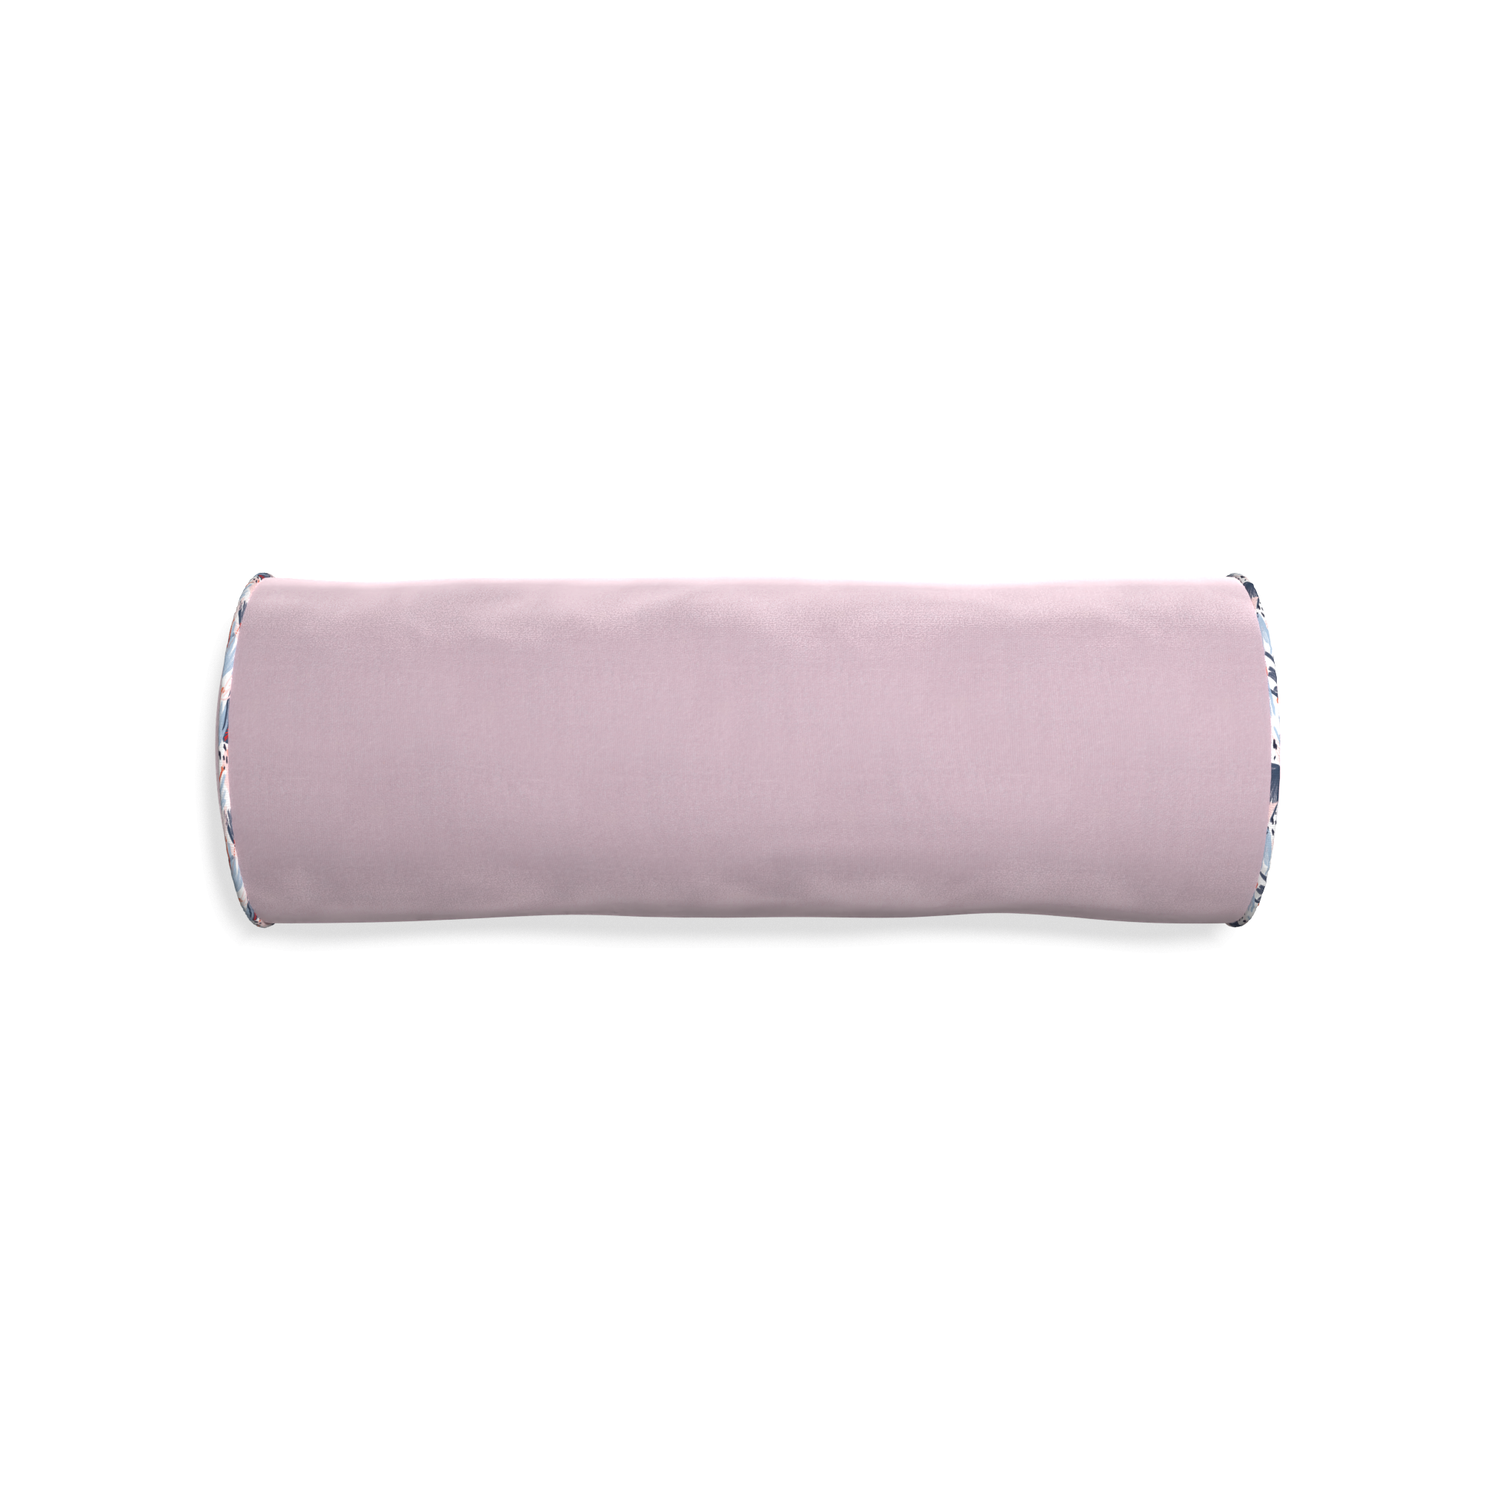 Bolster lilac velvet custom lilacpillow with e piping on white background